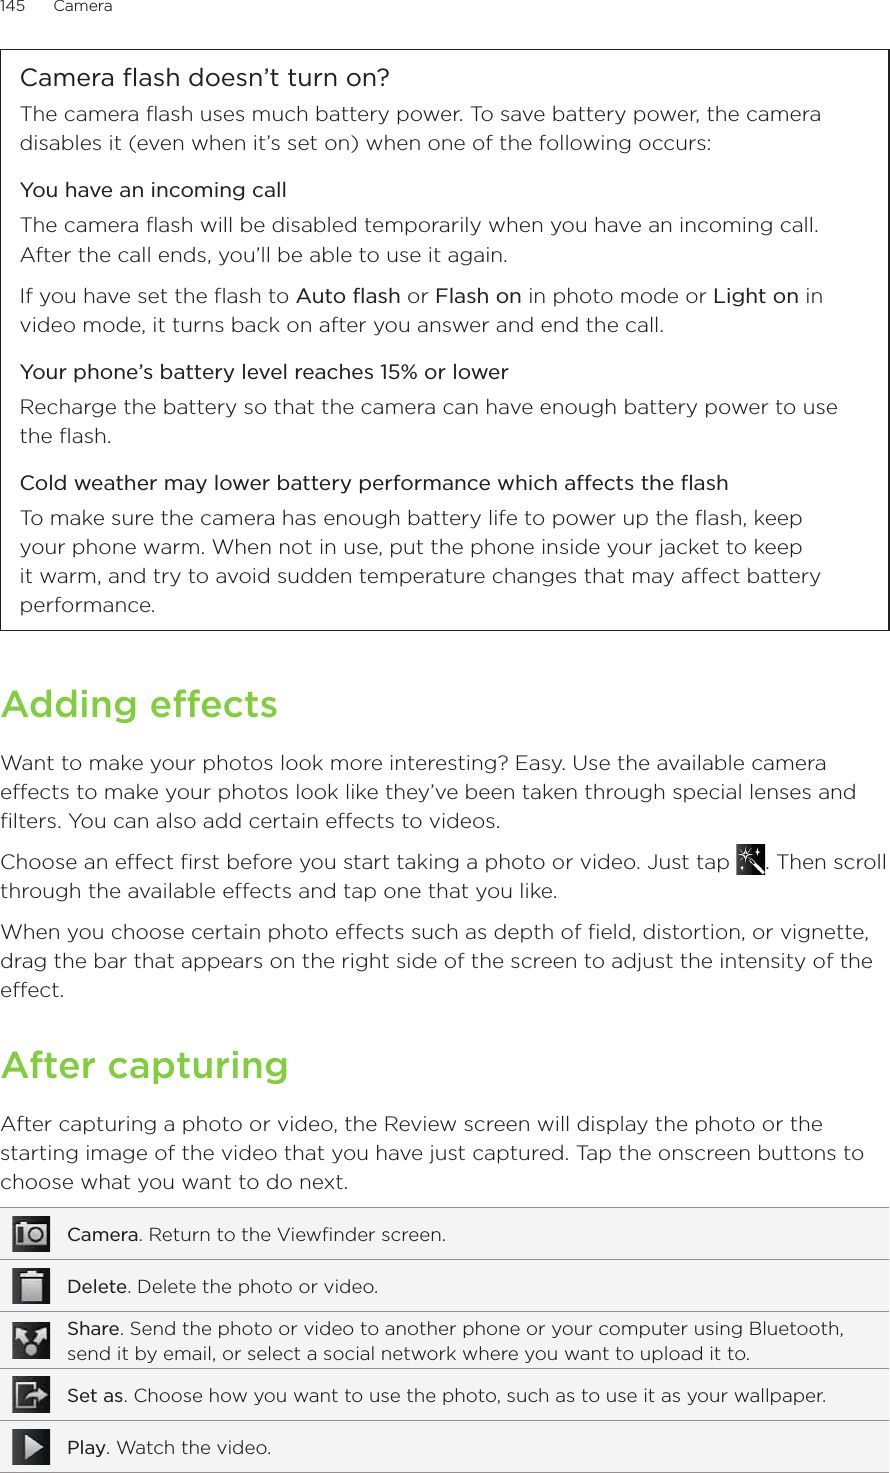 145      Camera      Camera flash doesn’t turn on?The camera flash uses much battery power. To save battery power, the camera disables it (even when it’s set on) when one of the following occurs:You have an incoming callThe camera flash will be disabled temporarily when you have an incoming call. After the call ends, you’ll be able to use it again.If you have set the flash to Auto flash or Flash on in photo mode or Light on in video mode, it turns back on after you answer and end the call.Your phone’s battery level reaches 15% or lowerRecharge the battery so that the camera can have enough battery power to use the flash.Cold weather may lower battery performance which affects the flashTo make sure the camera has enough battery life to power up the flash, keep your phone warm. When not in use, put the phone inside your jacket to keep it warm, and try to avoid sudden temperature changes that may affect battery performance.Adding effectsWant to make your photos look more interesting? Easy. Use the available camera effects to make your photos look like they’ve been taken through special lenses and filters. You can also add certain effects to videos.Choose an effect first before you start taking a photo or video. Just tap  . Then scroll through the available effects and tap one that you like.When you choose certain photo effects such as depth of field, distortion, or vignette, drag the bar that appears on the right side of the screen to adjust the intensity of the effect.After capturingAfter capturing a photo or video, the Review screen will display the photo or the starting image of the video that you have just captured. Tap the onscreen buttons to choose what you want to do next.Camera. Return to the Viewfinder screen.Delete. Delete the photo or video.Share. Send the photo or video to another phone or your computer using Bluetooth, send it by email, or select a social network where you want to upload it to.Set as. Choose how you want to use the photo, such as to use it as your wallpaper.Play. Watch the video.